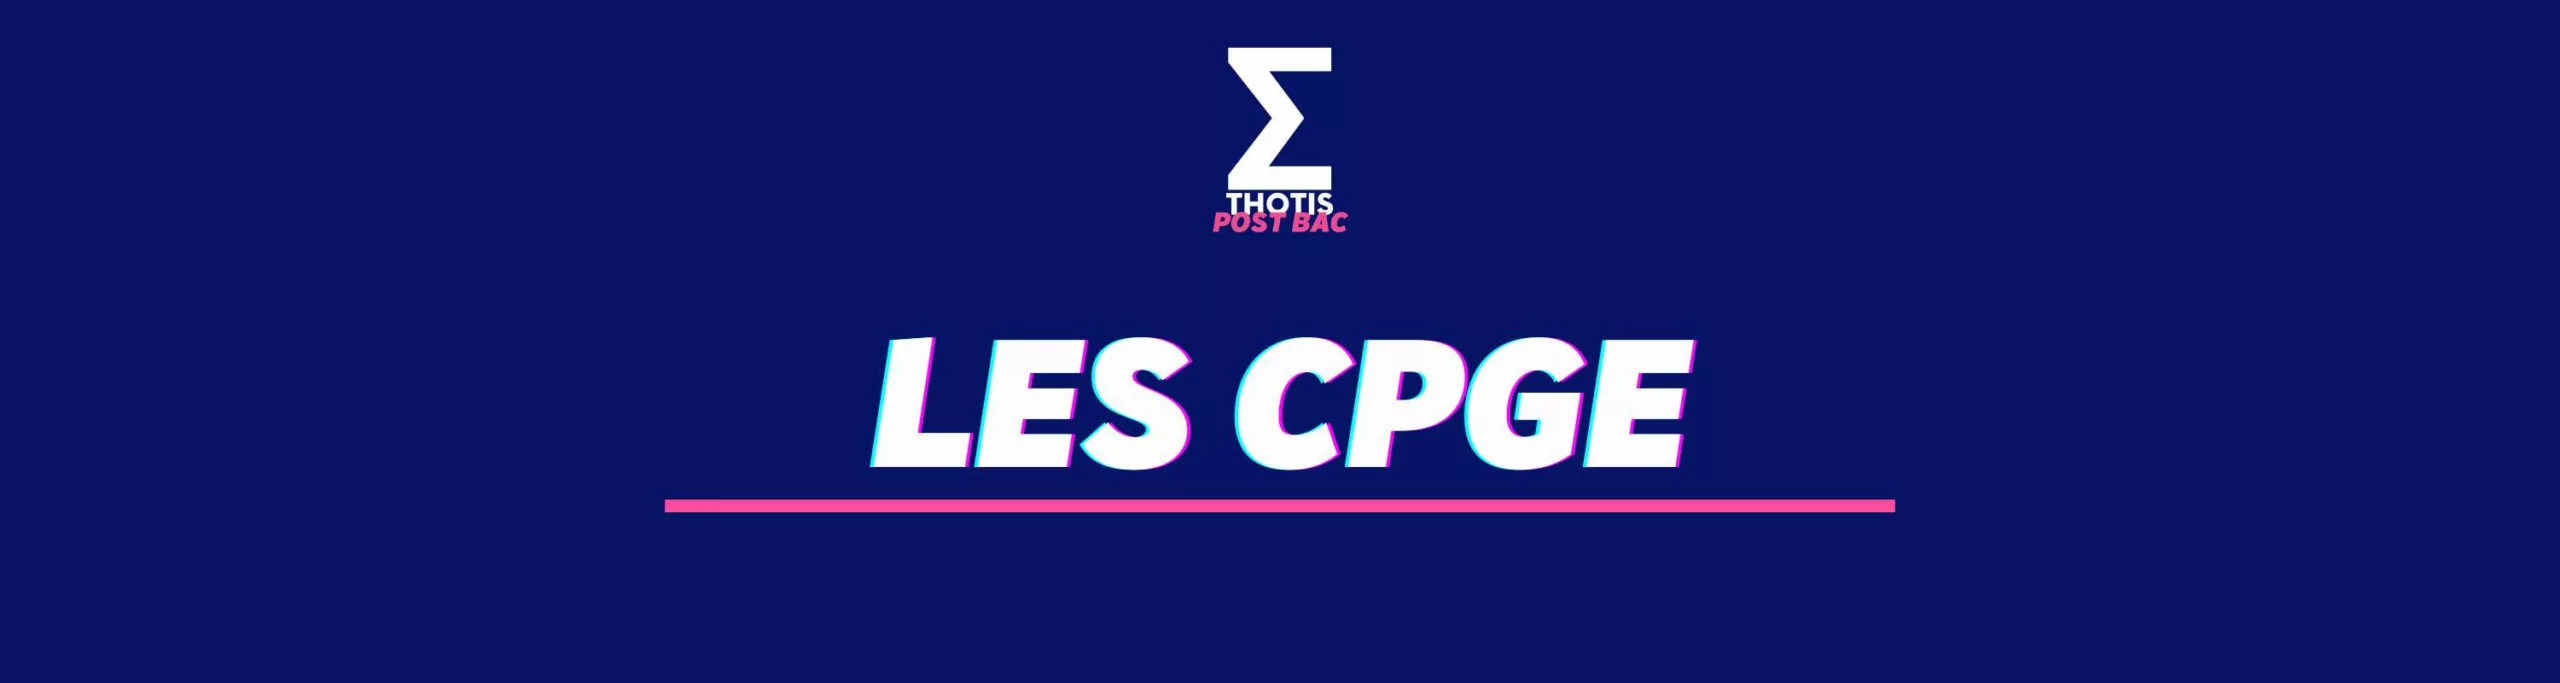 LES CPGE